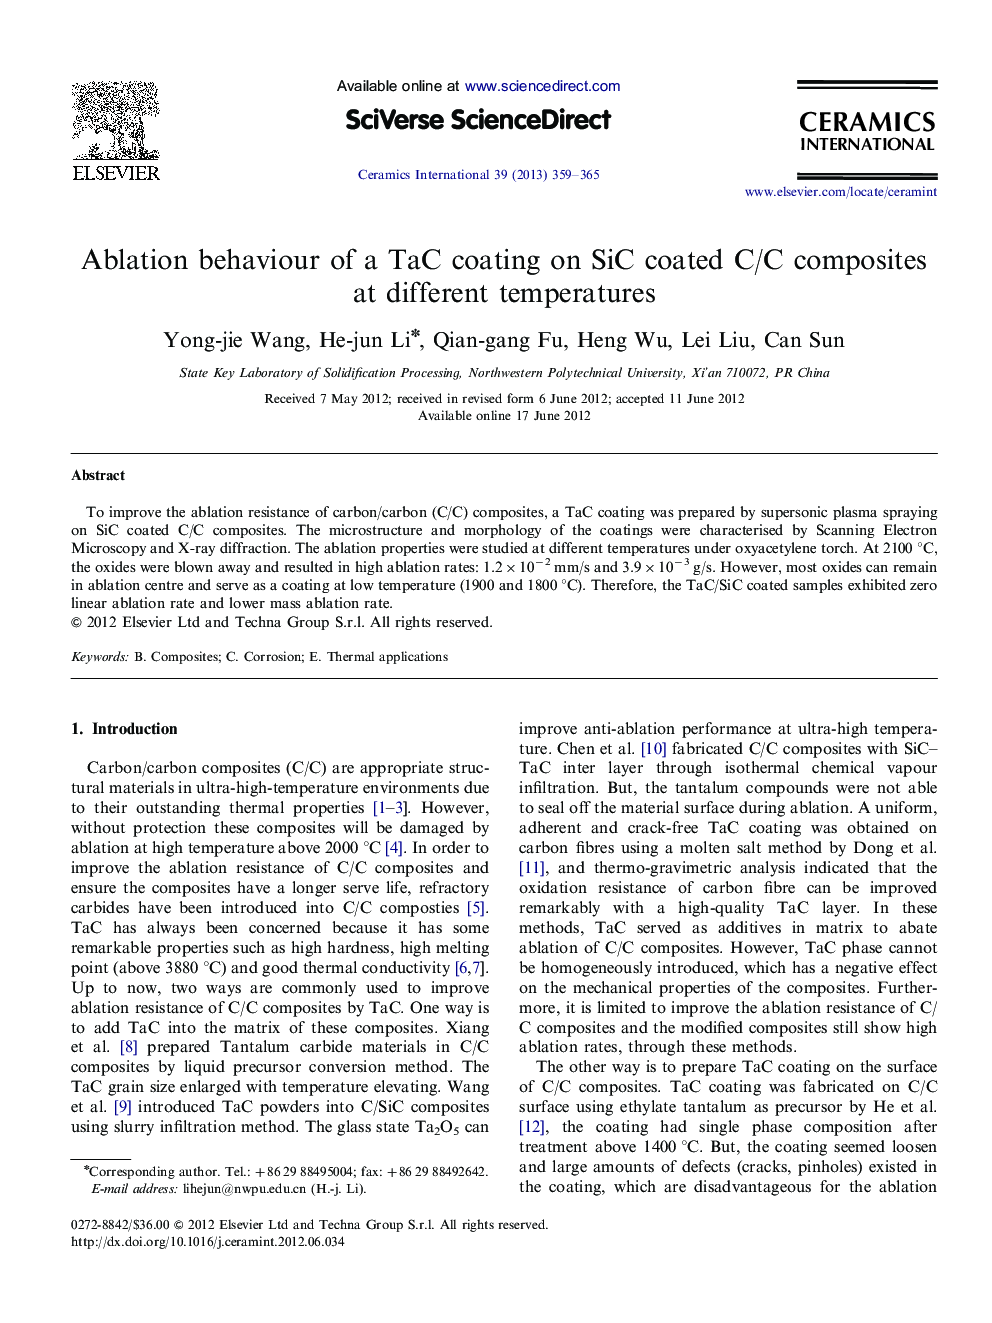 Ablation behaviour of a TaC coating on SiC coated C/C composites at different temperatures